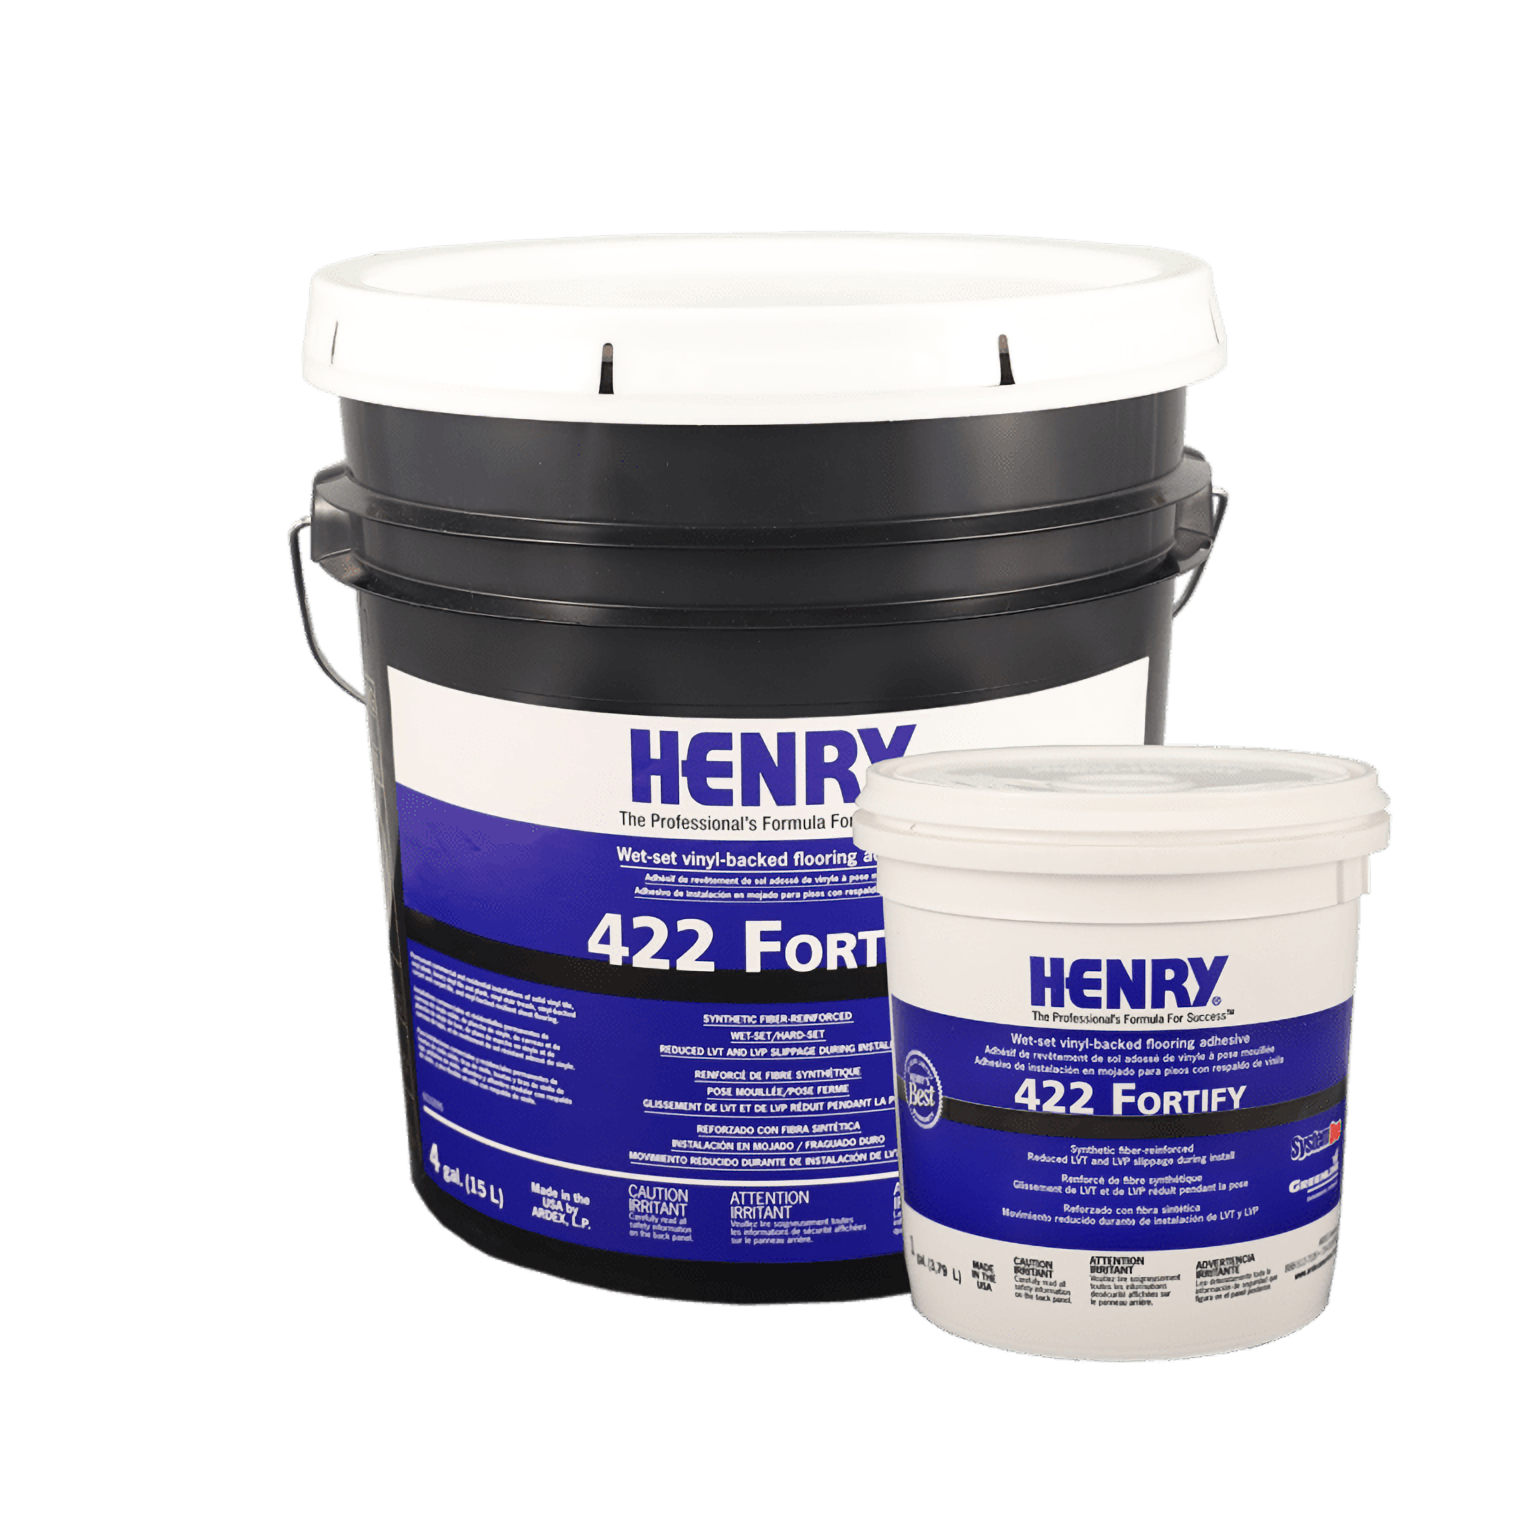 HENRY 422 Fortify Adhesive